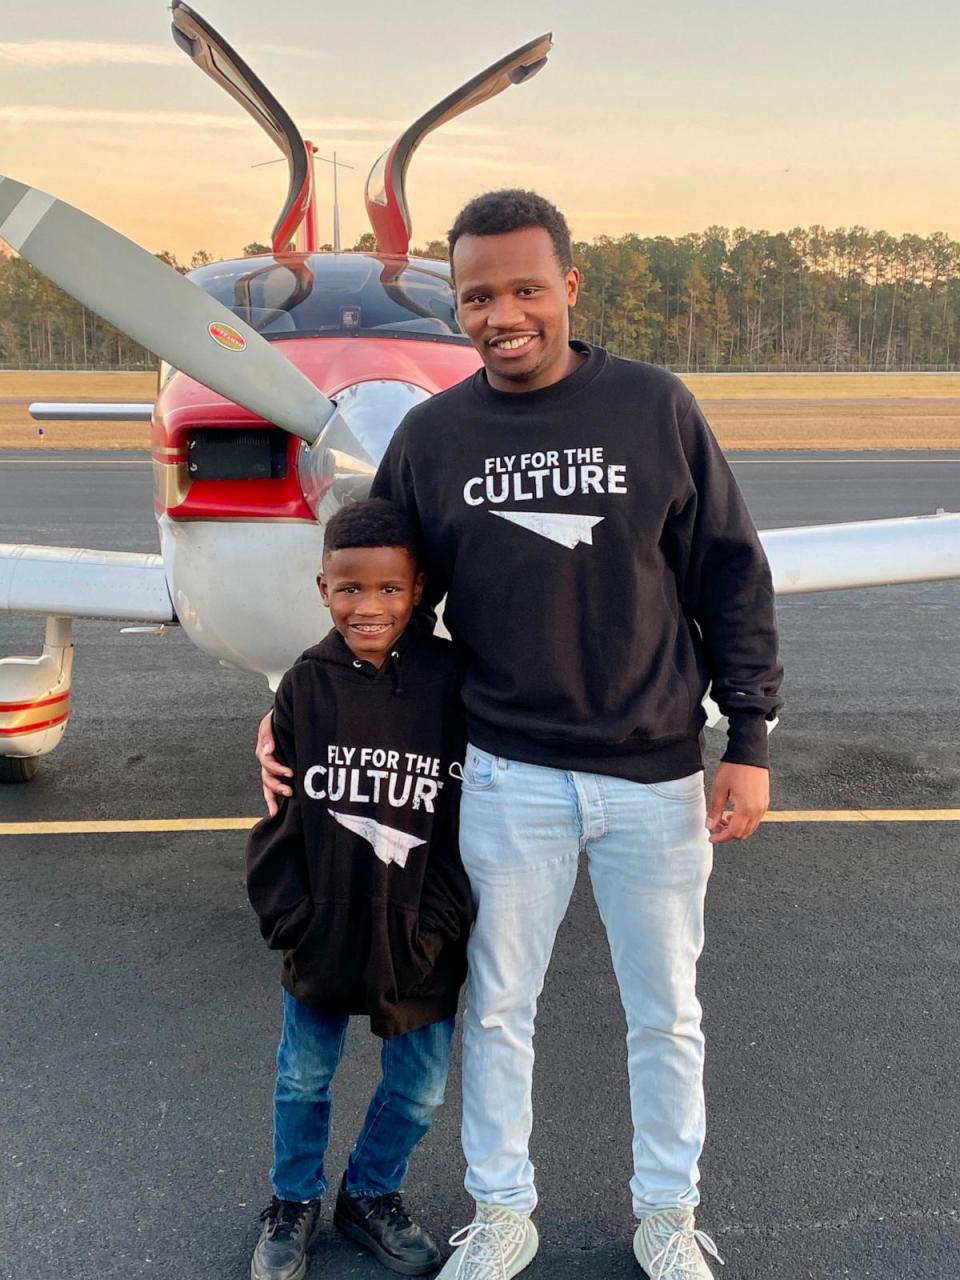 PHOTO: Fly for The Culture is a non-profit organization that promotes diversity in the aviation industry, according to its website. (Courtesy of Courtland Savage)